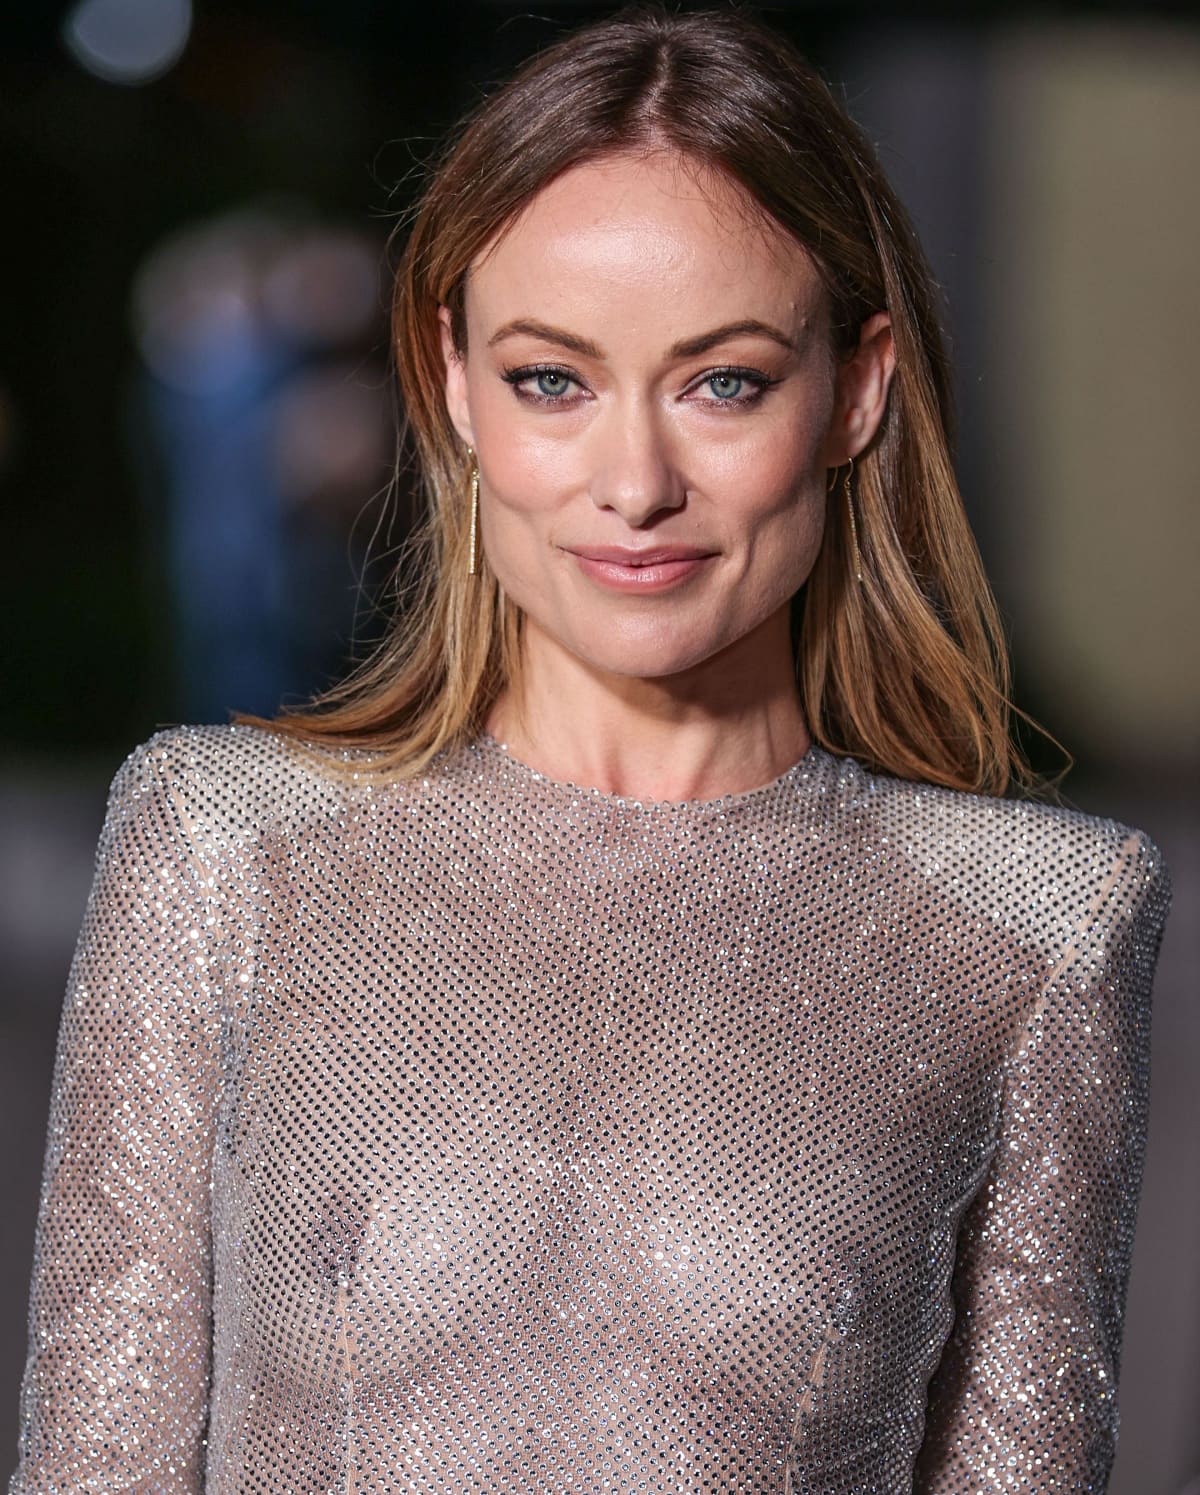 Taking a page from Florence Pugh, Olivia Wilde bares her nipples in a risqué sheer gown